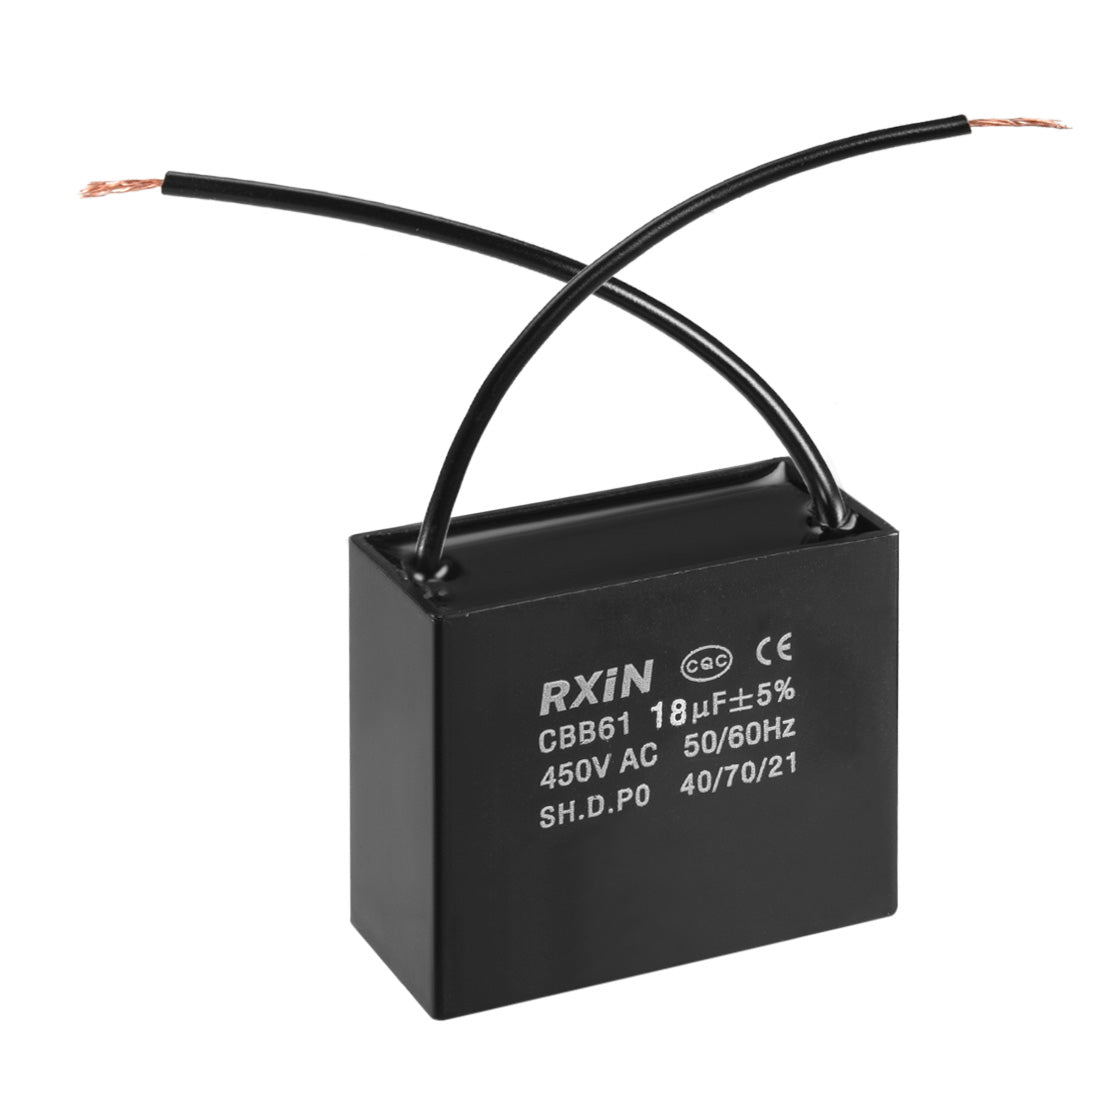 uxcell Uxcell CBB61 Run Capacitor 450V AC 18uF 2 Cable Metallized Polypropylene Film Capacitors for Ceiling Fan